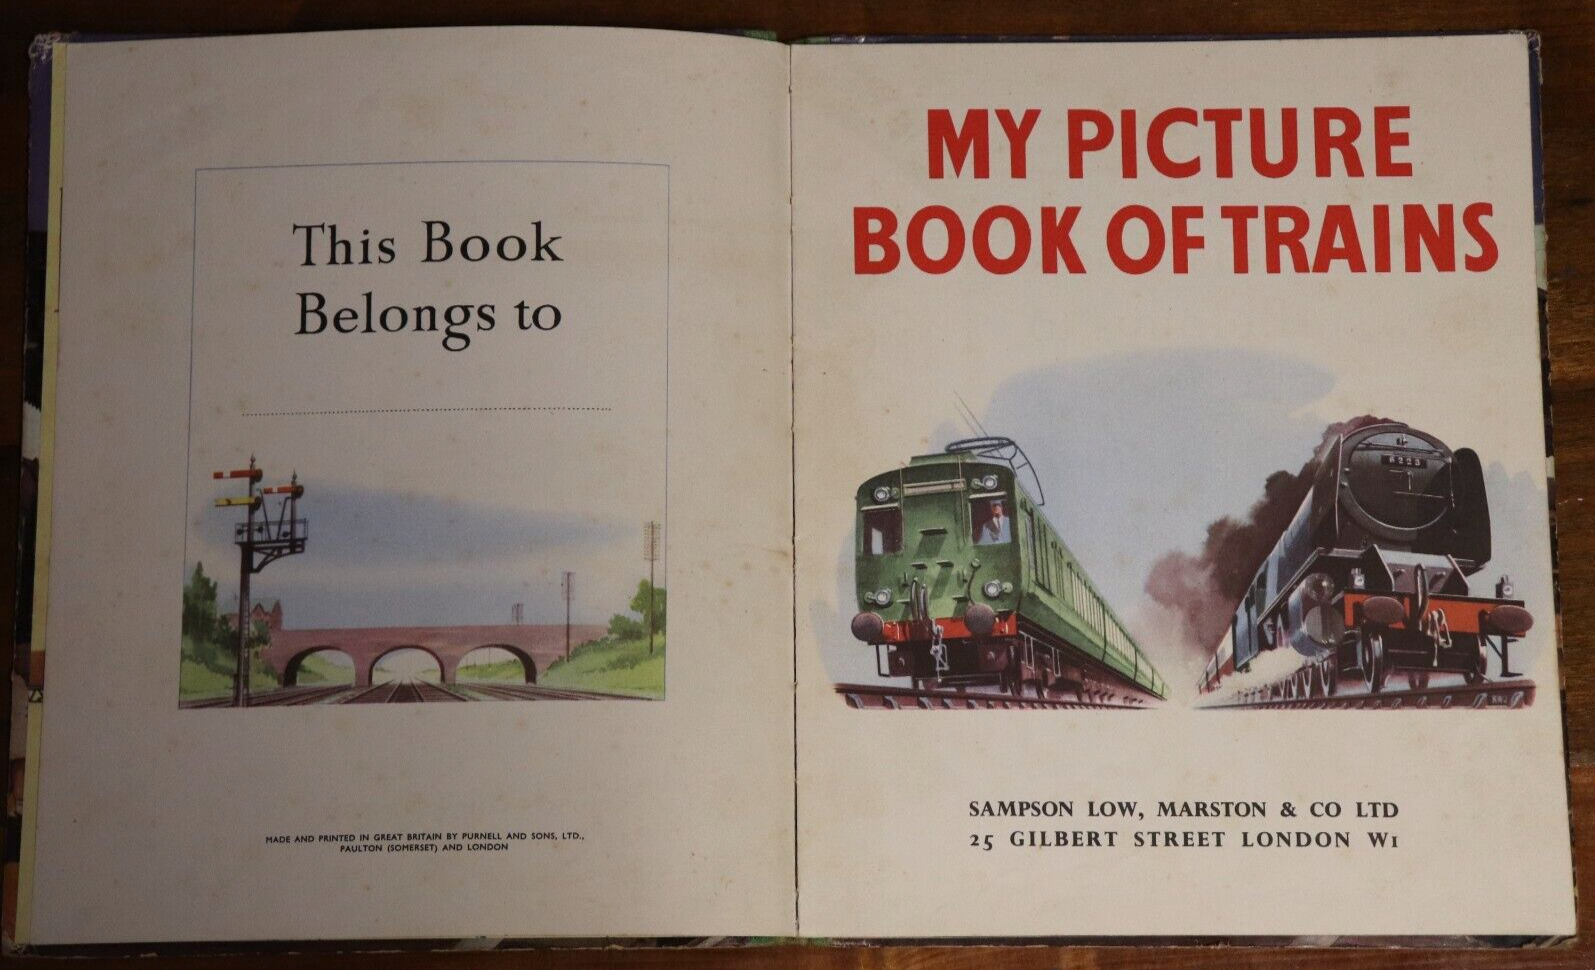 My Picture Book Of Trains - c1949 - Antique Childrens Book - 0